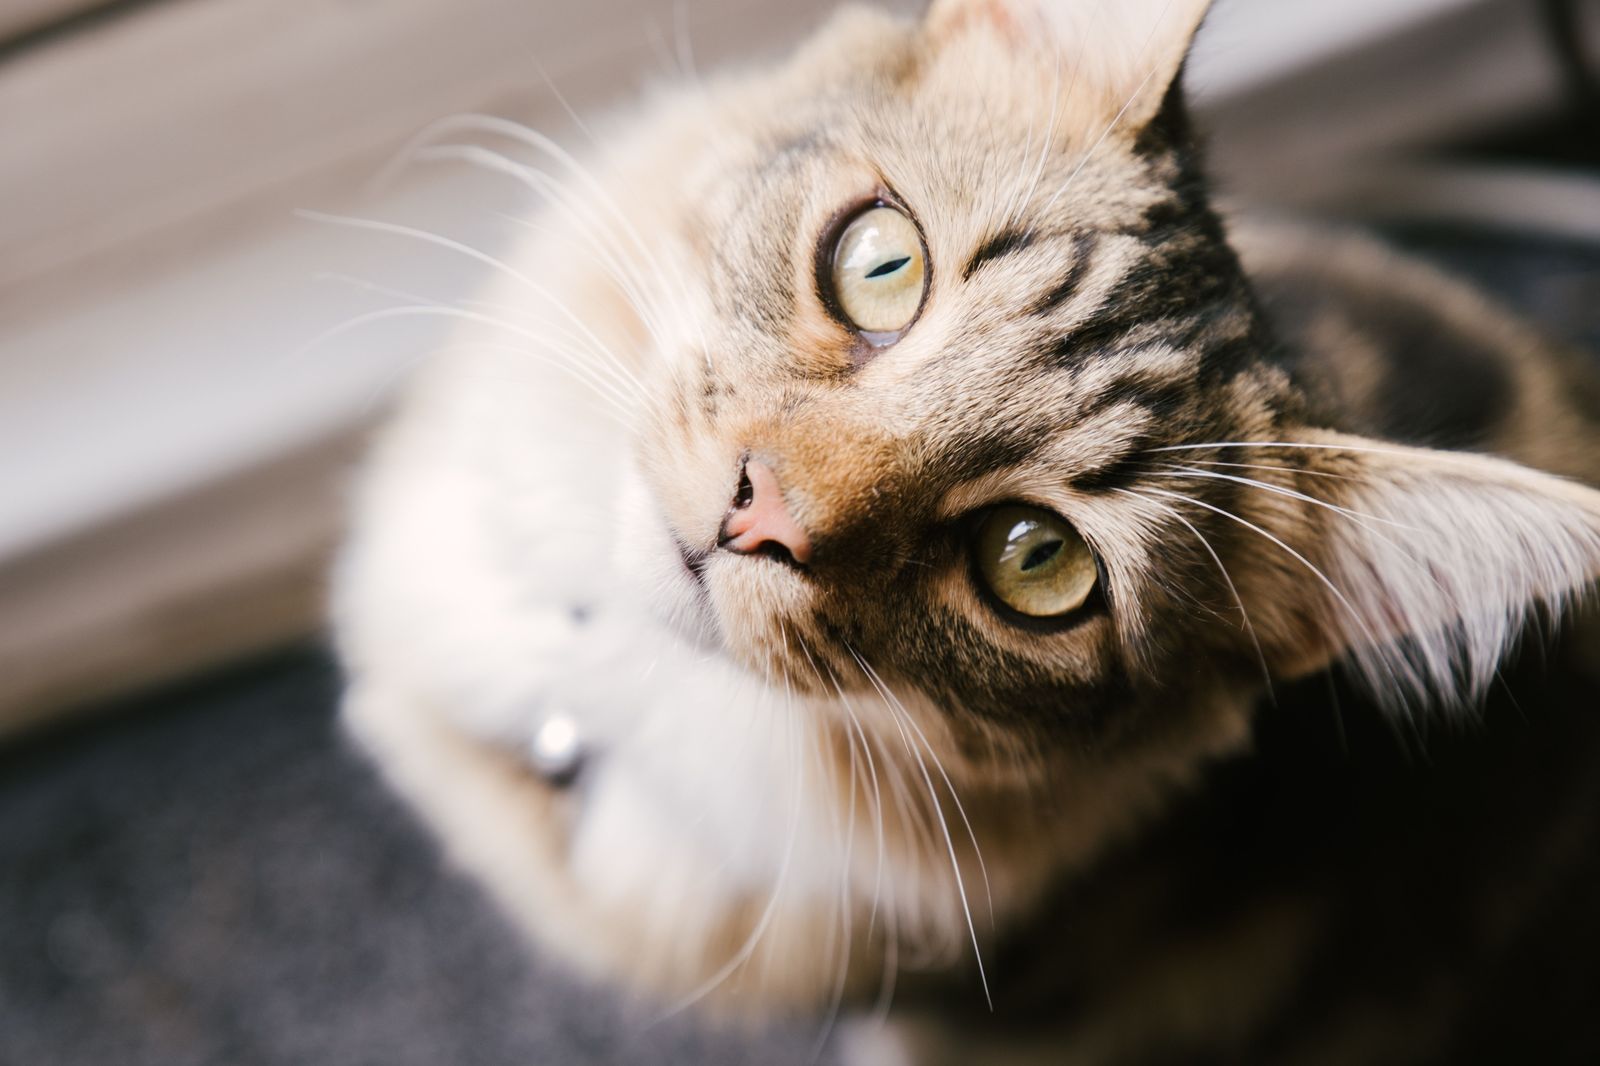 Things to consider when adopting a pet - Vetster